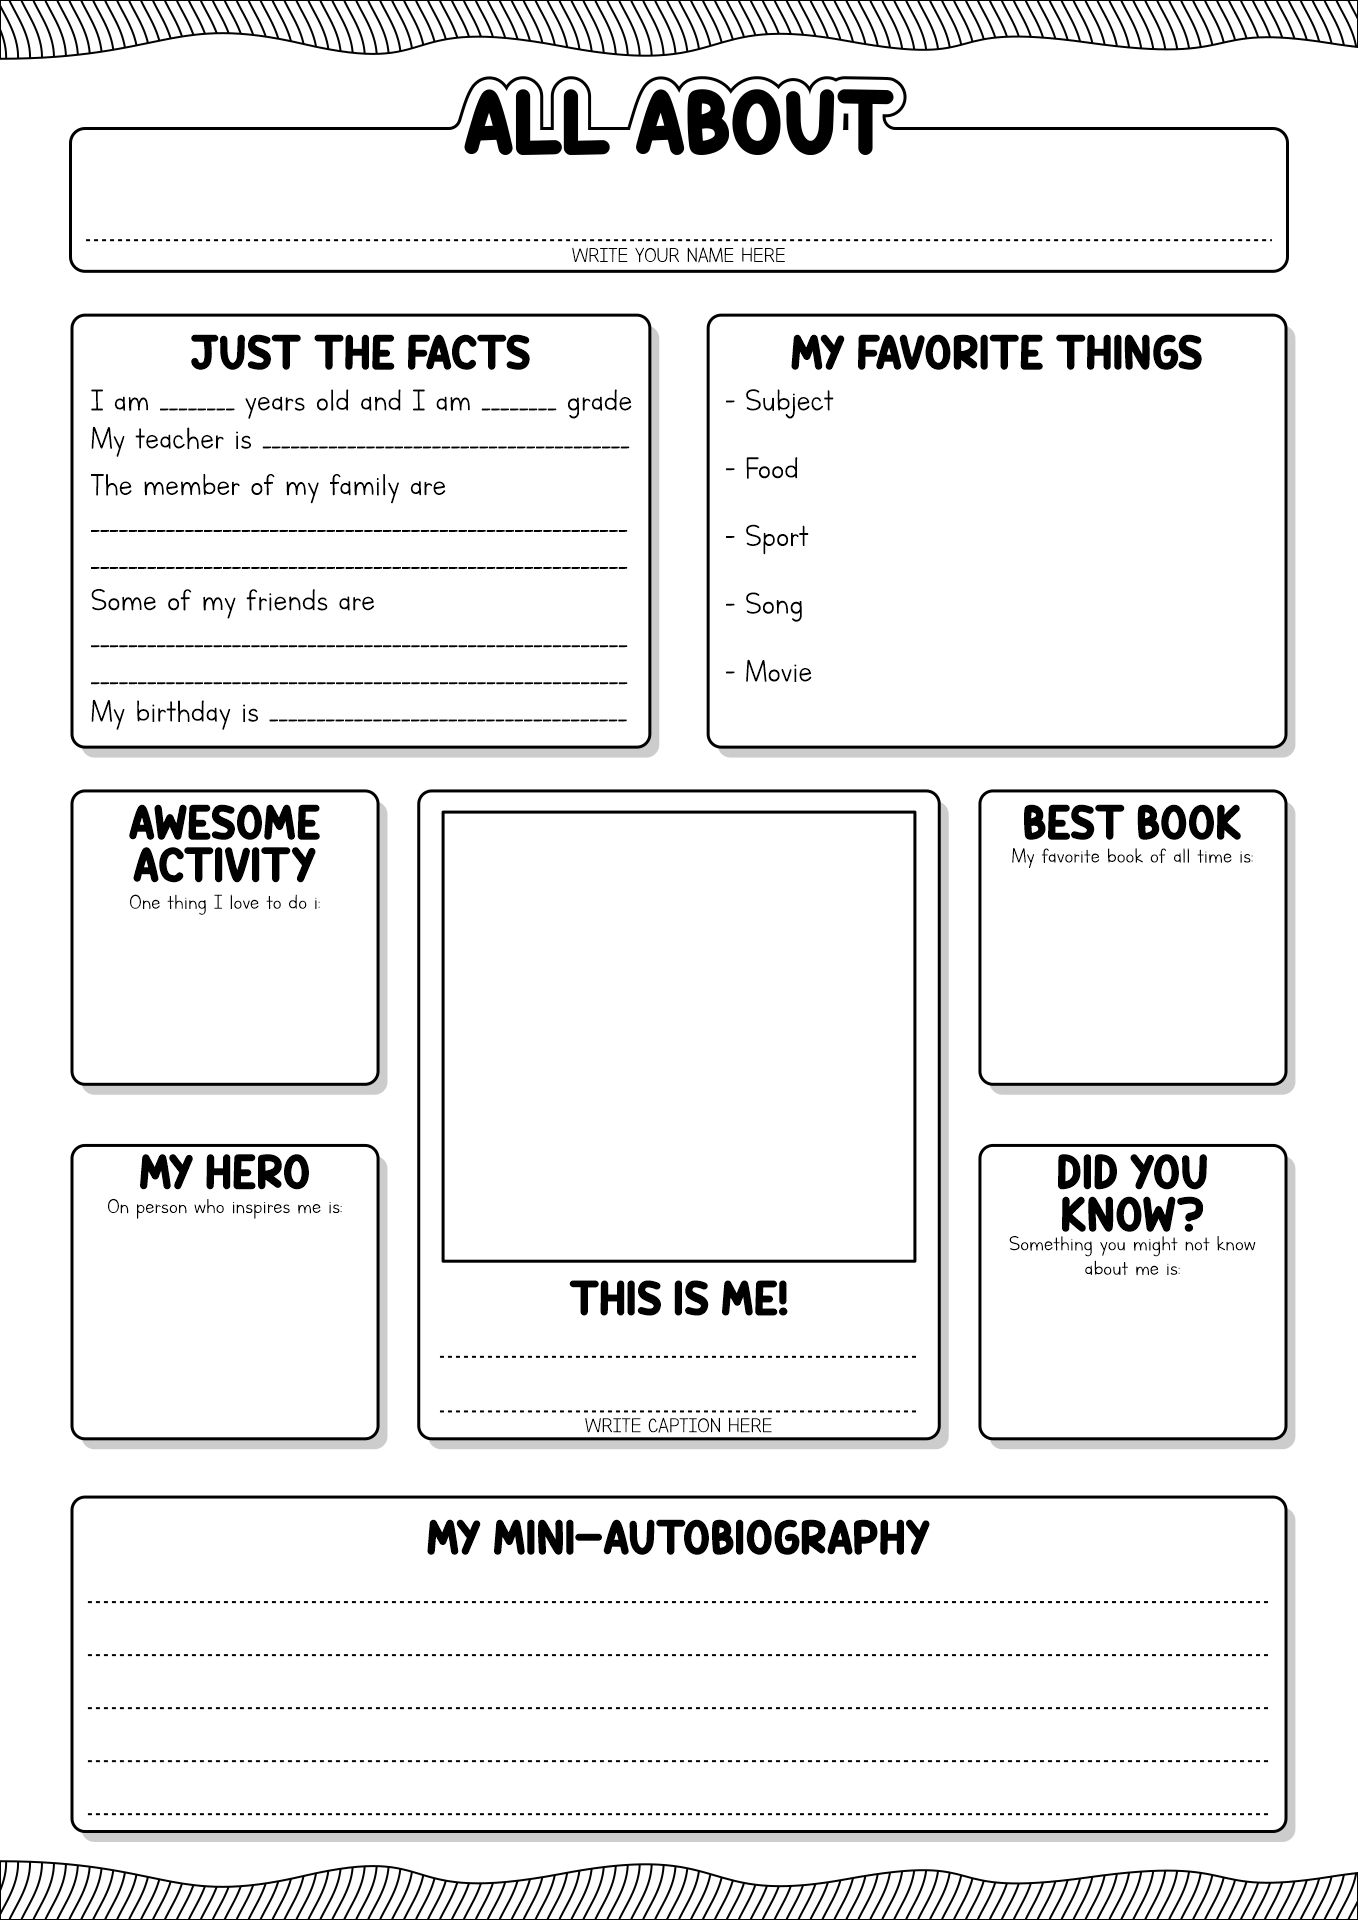 13 Best Images Of Get To Know Me Worksheet Get To Know You Worksheet Getting To Know Me